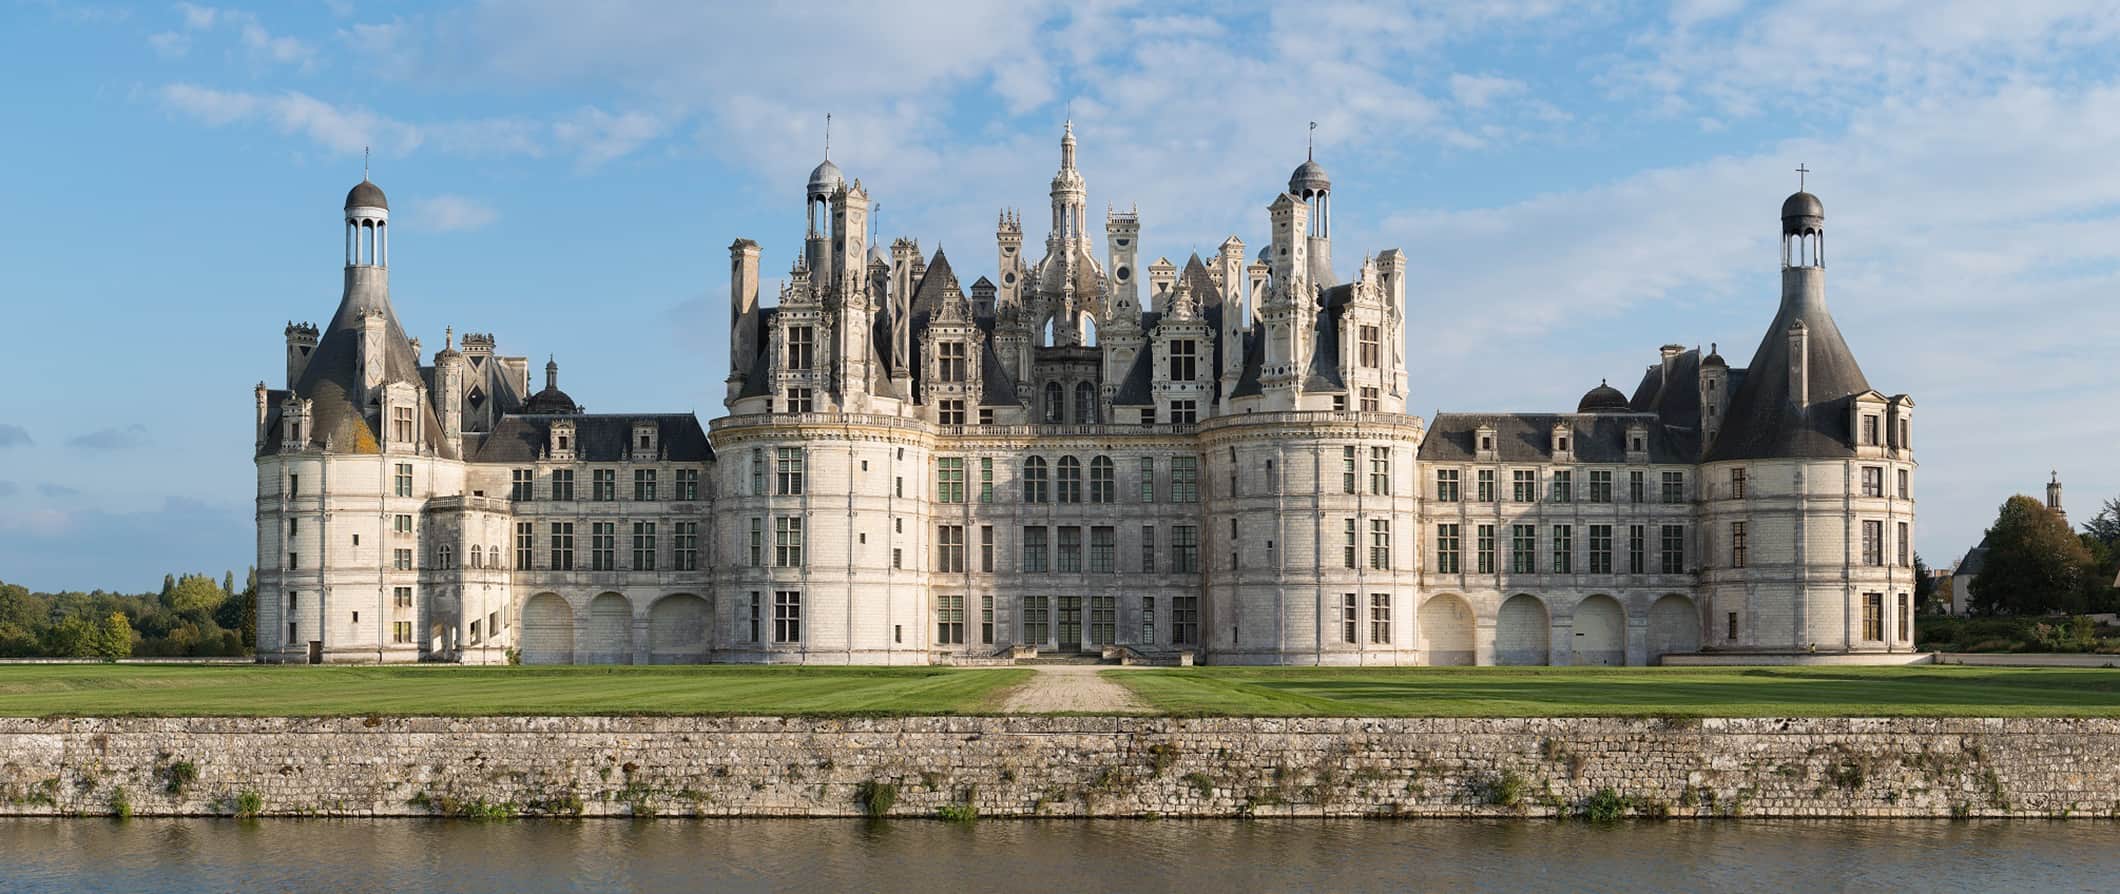 A huge historic French castle in the Loire Valley surrounded by grass and greenery